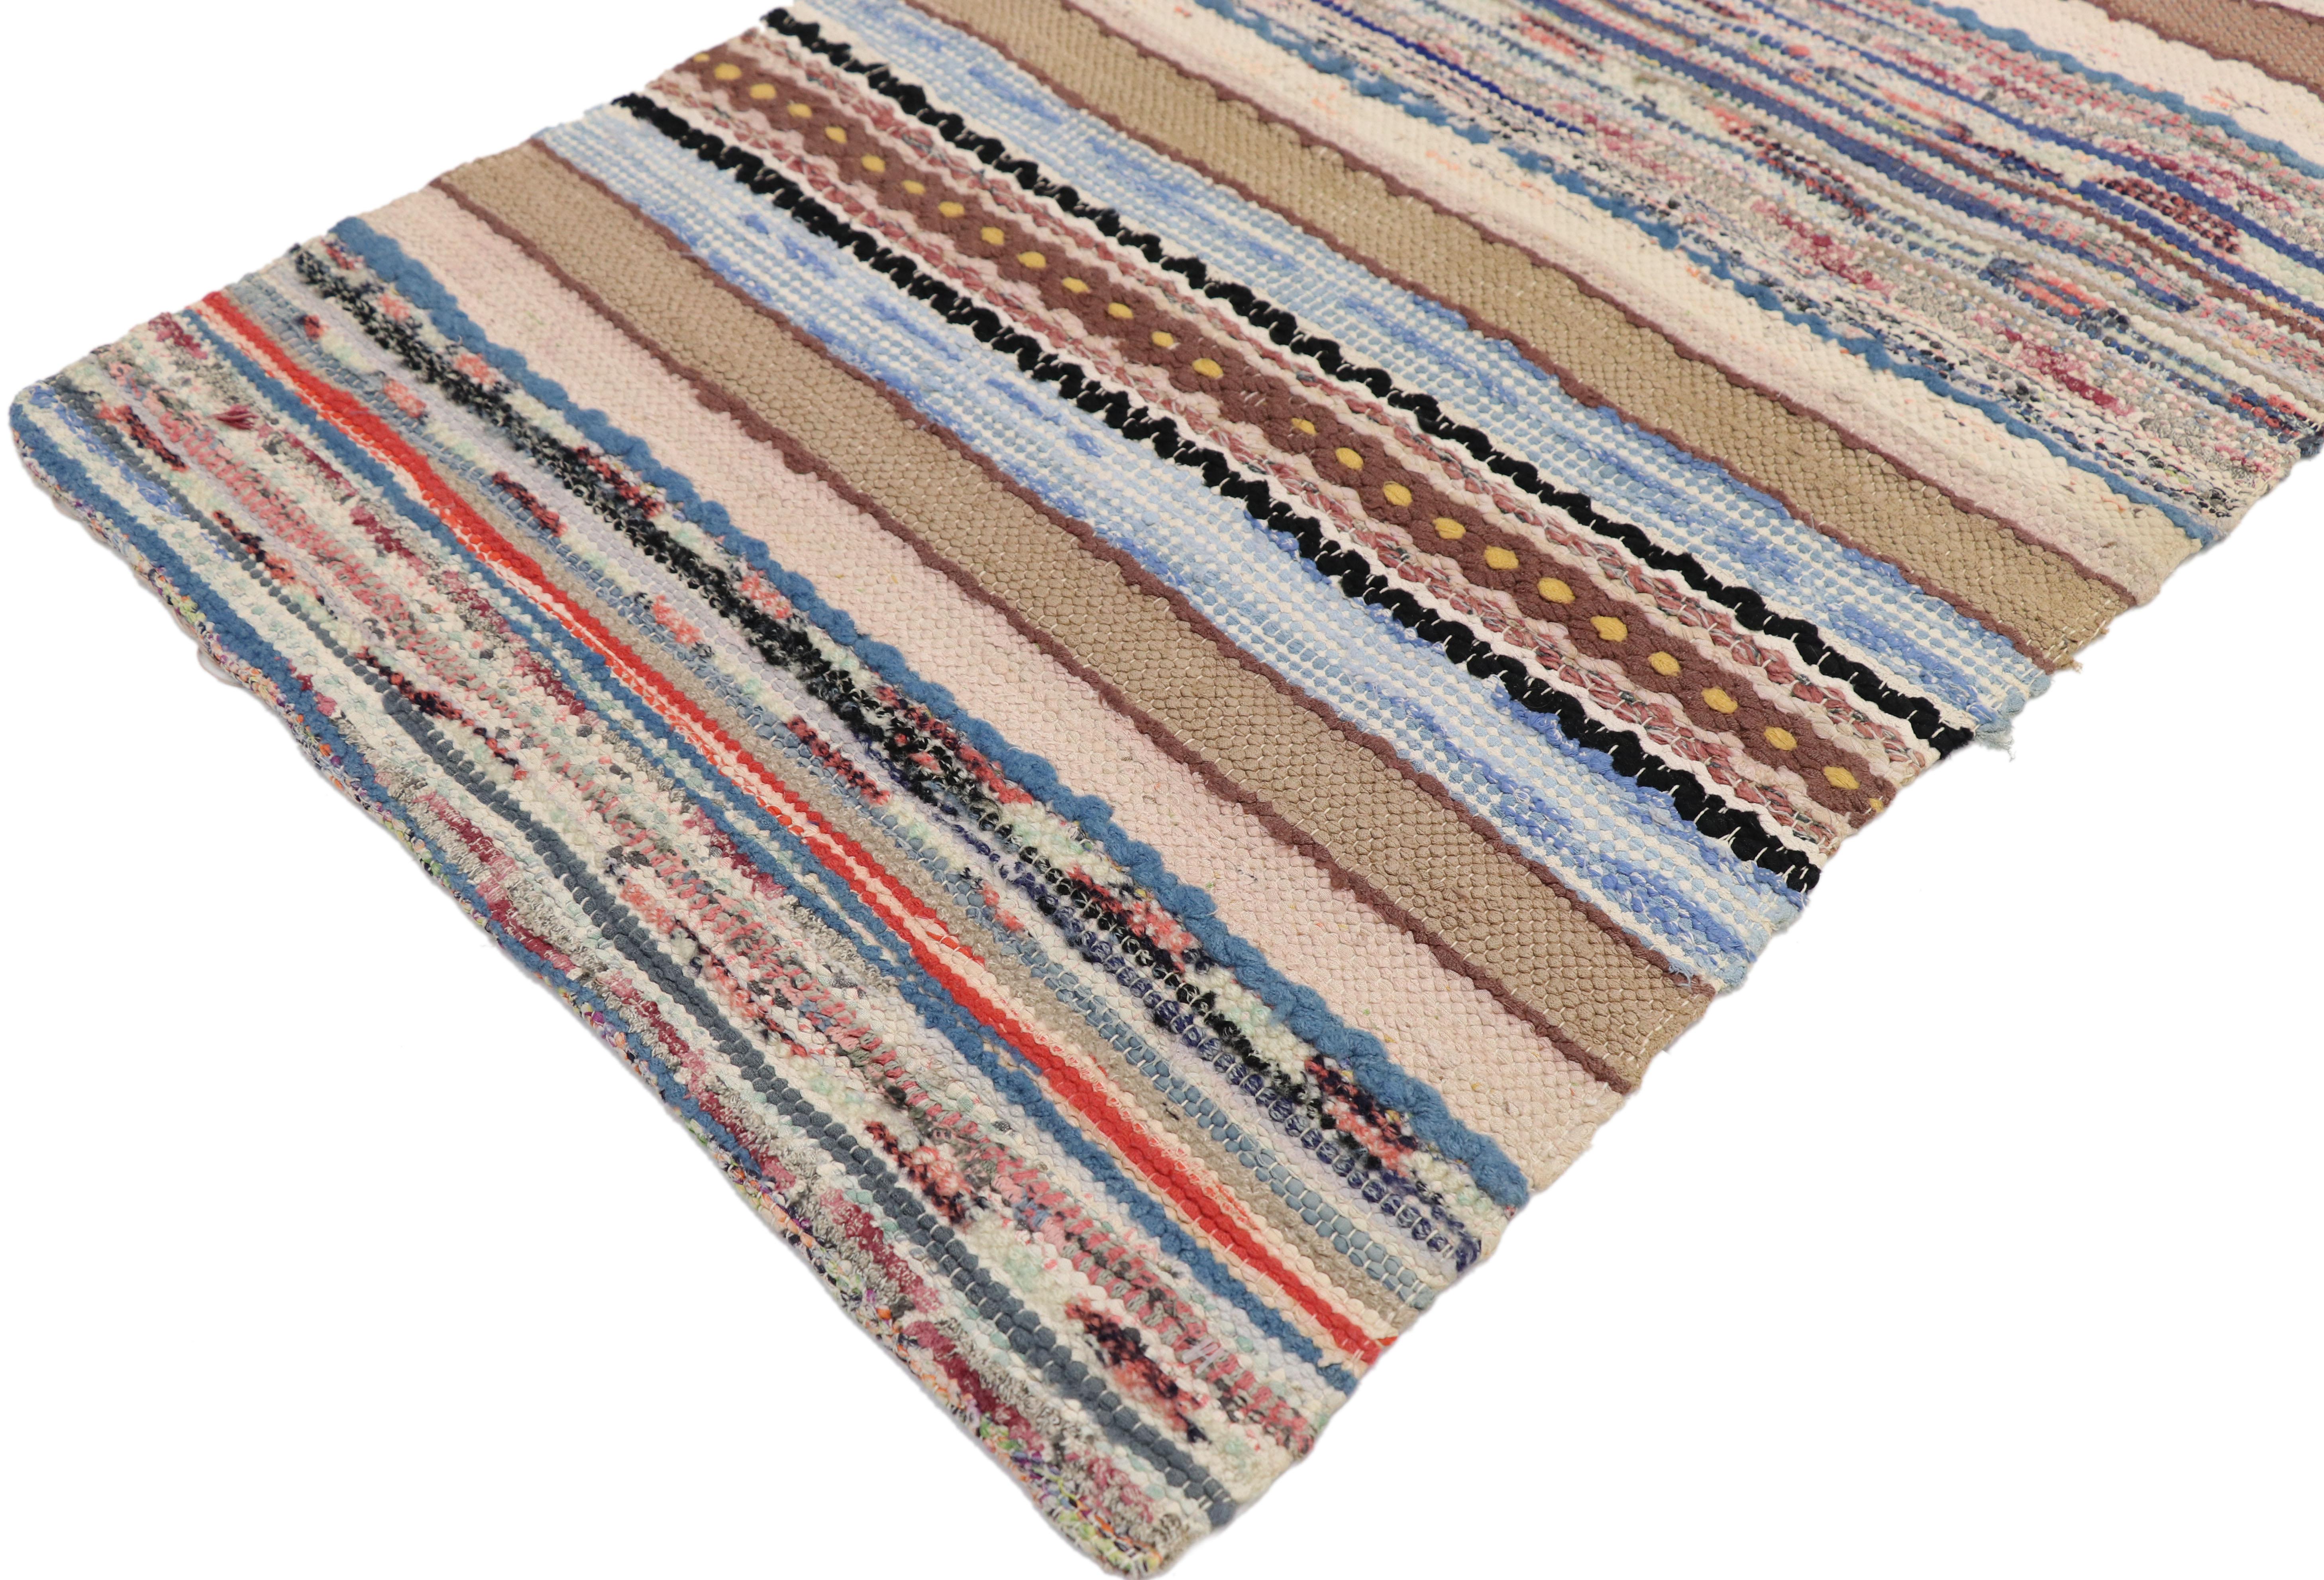 73112 Vintage American hooked runner with Bohemian style, narrow striped hallway runner. This vintage American Hooked runner features a variety of colorful stripes composed of both wide and narrow bands forming a captivating visual effect. Vintage,